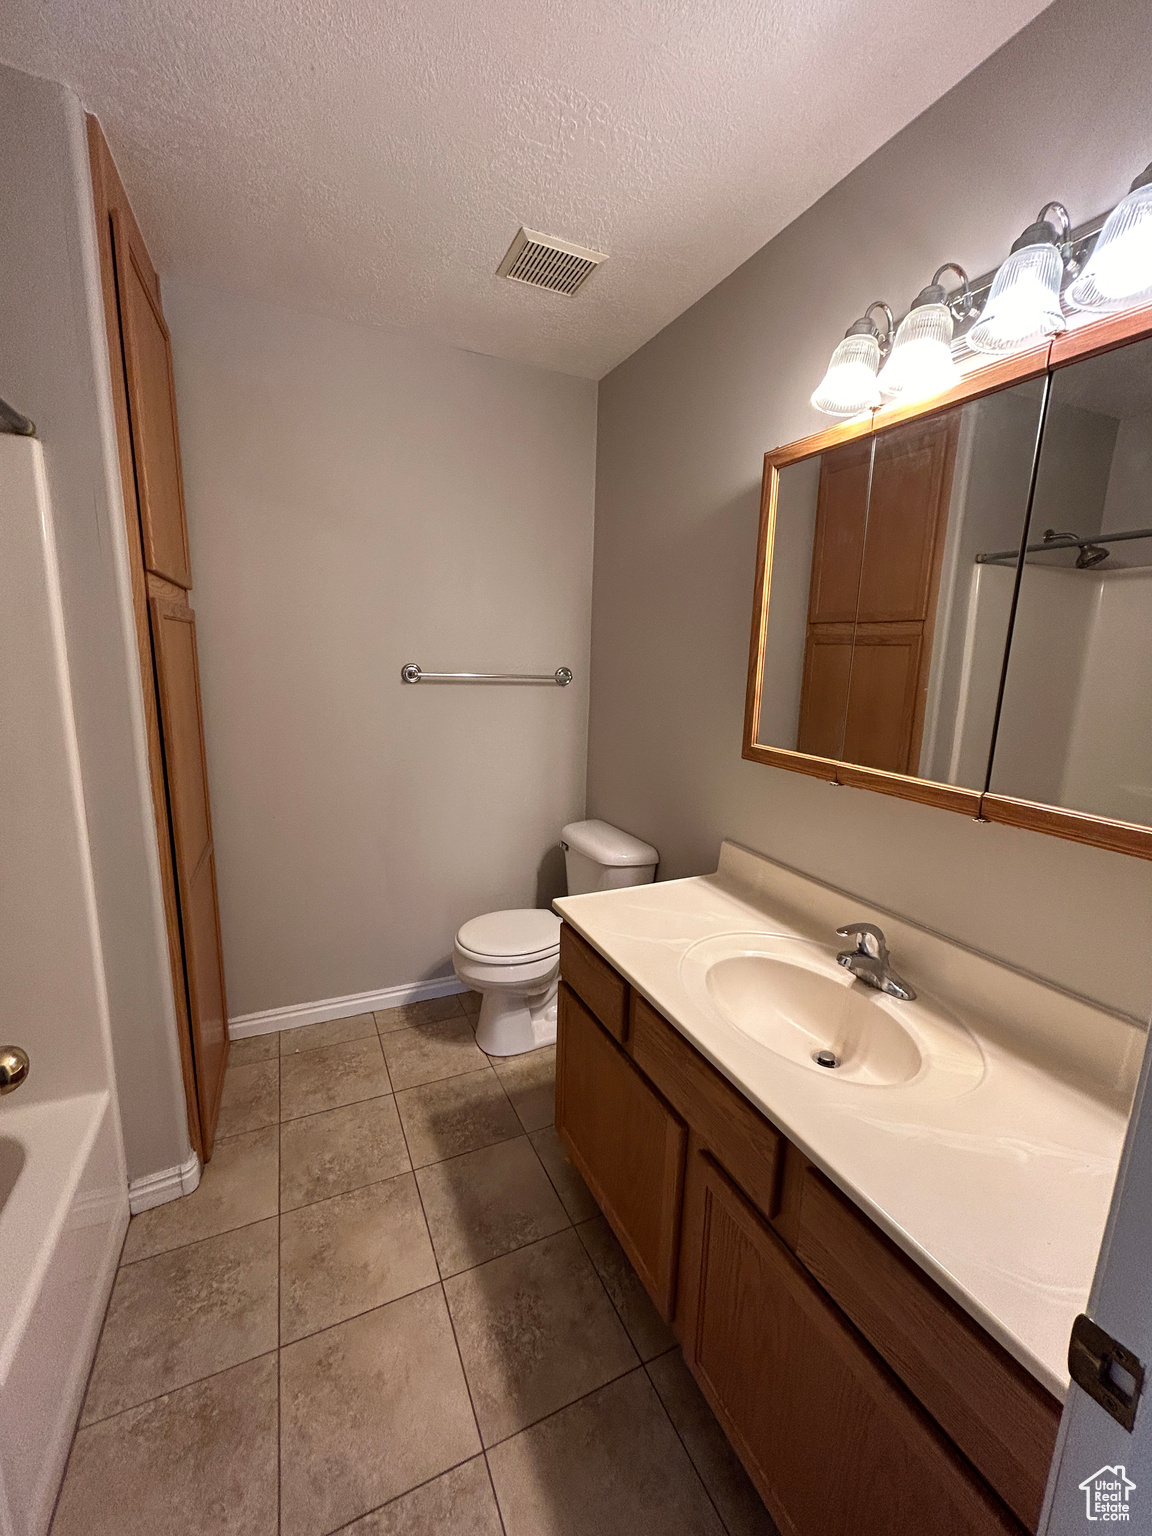 Full hall bathroom with toilet, tile floors, a textured ceiling, and vanity